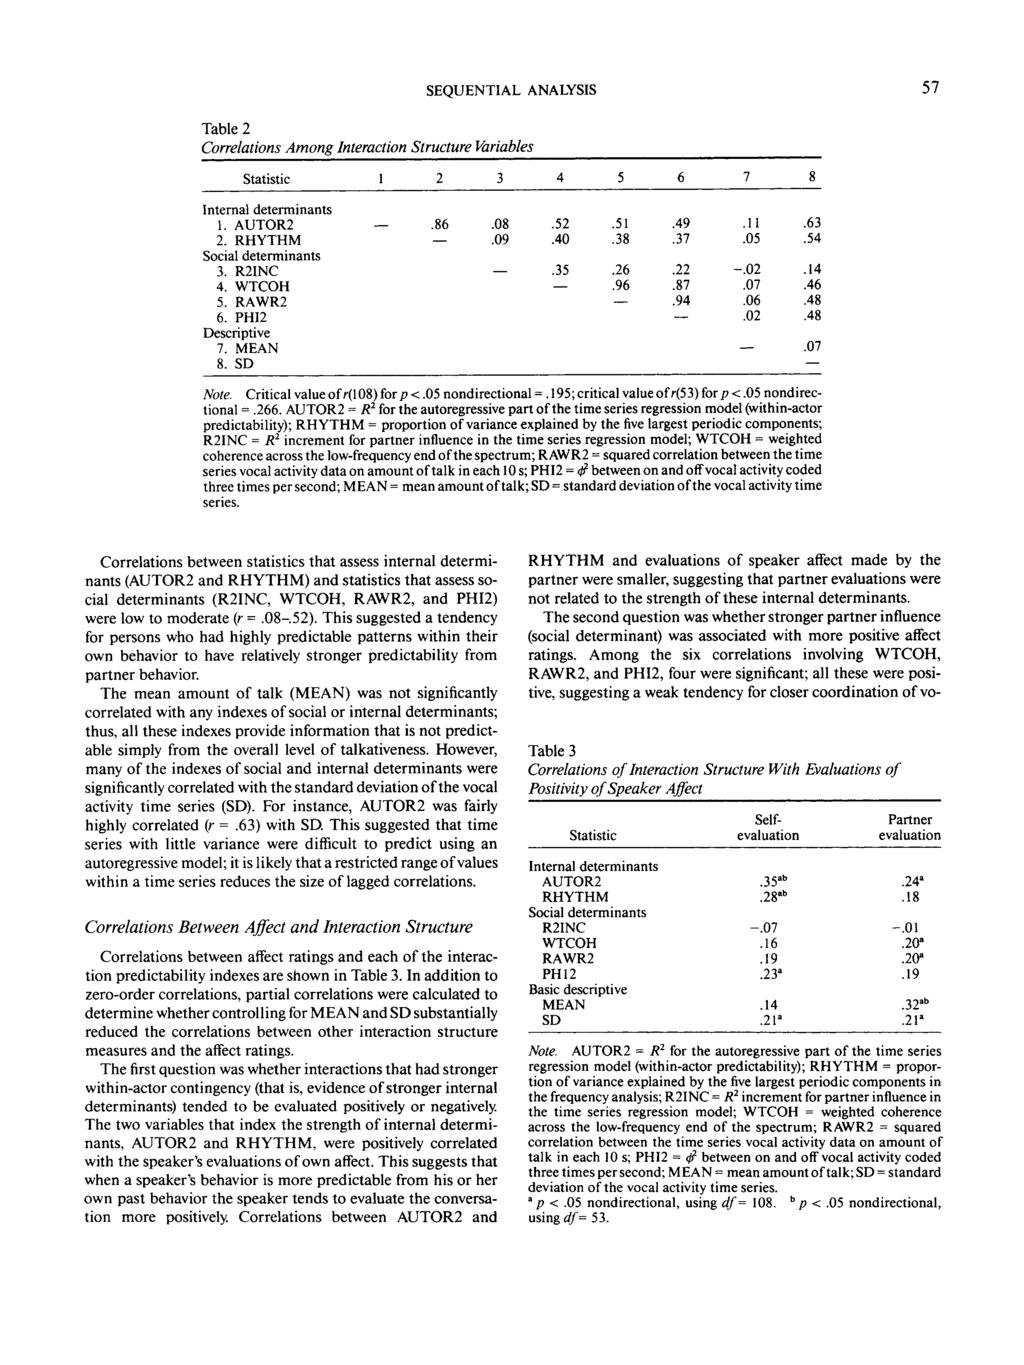 Table 2 Correlations Among Interaction Structure Variables Statistic 1 SEQUENTIAL ANALYSIS 57 Internal determinants 1. AUTOR2 2. RHYTHM Social determinants 3. R2INC 4. WTCOH 5. RAWR2 6.